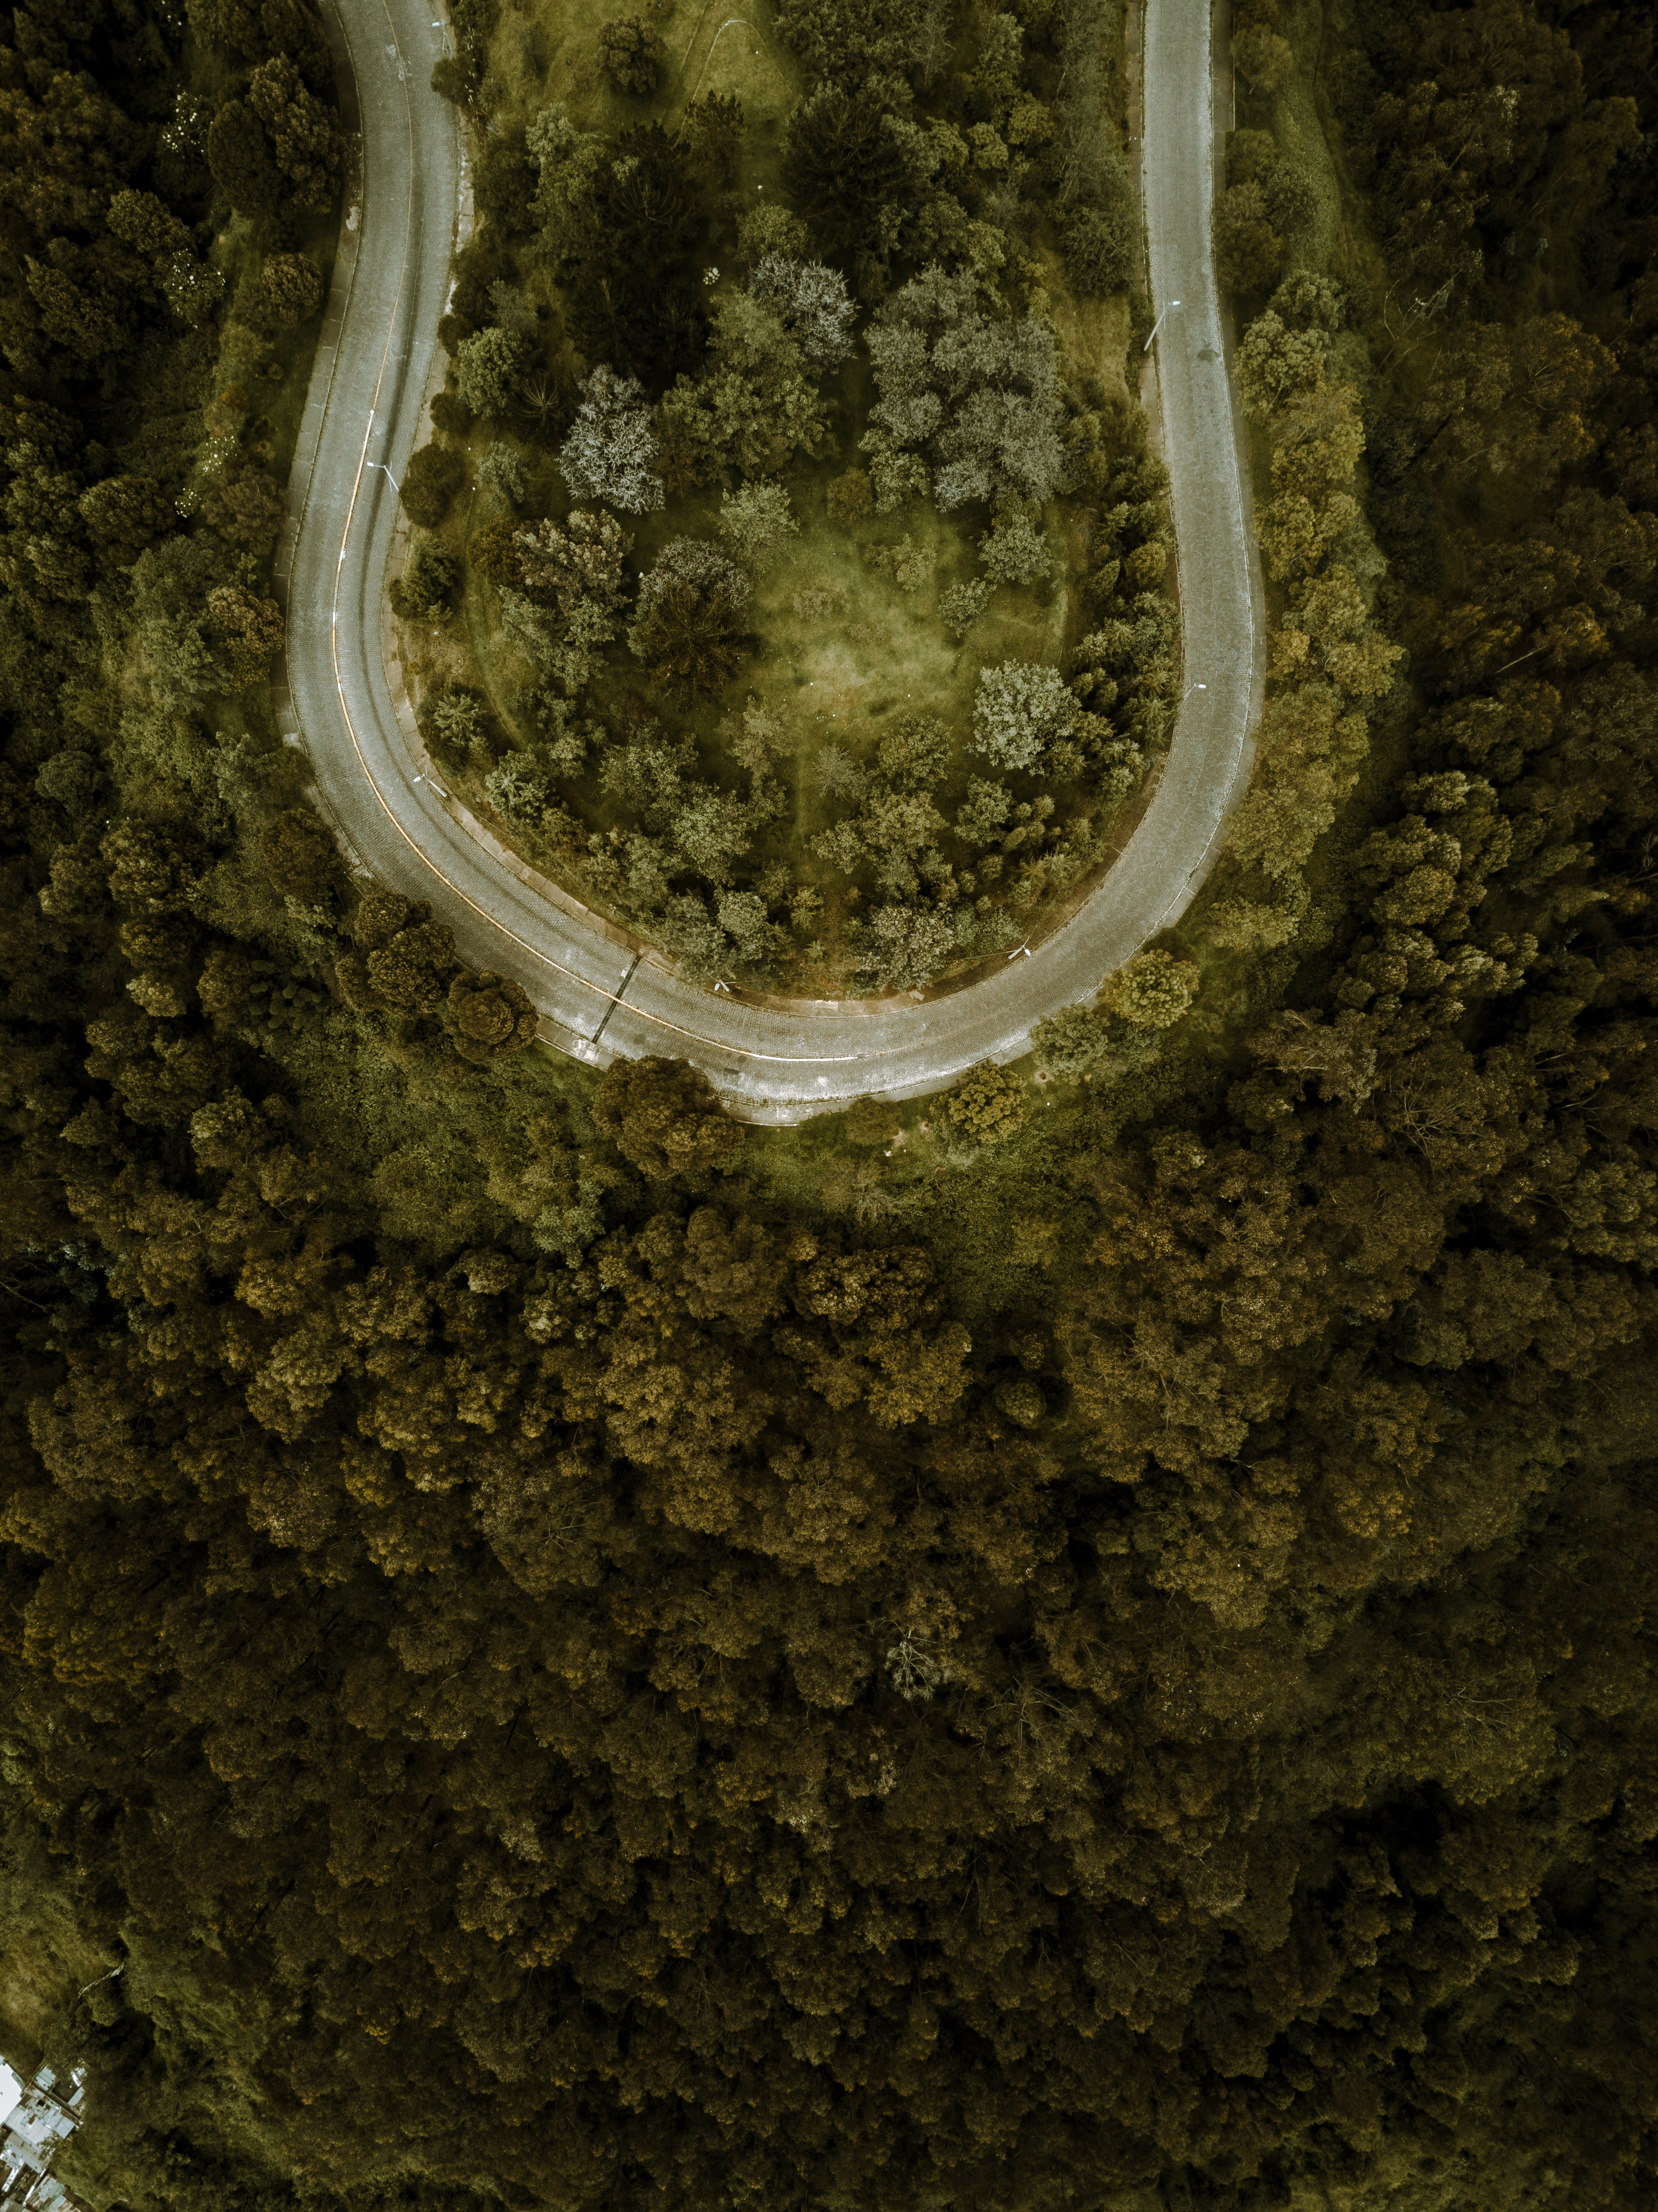 view from above, nature, road, turn, forest, winding, sinuous cellphone